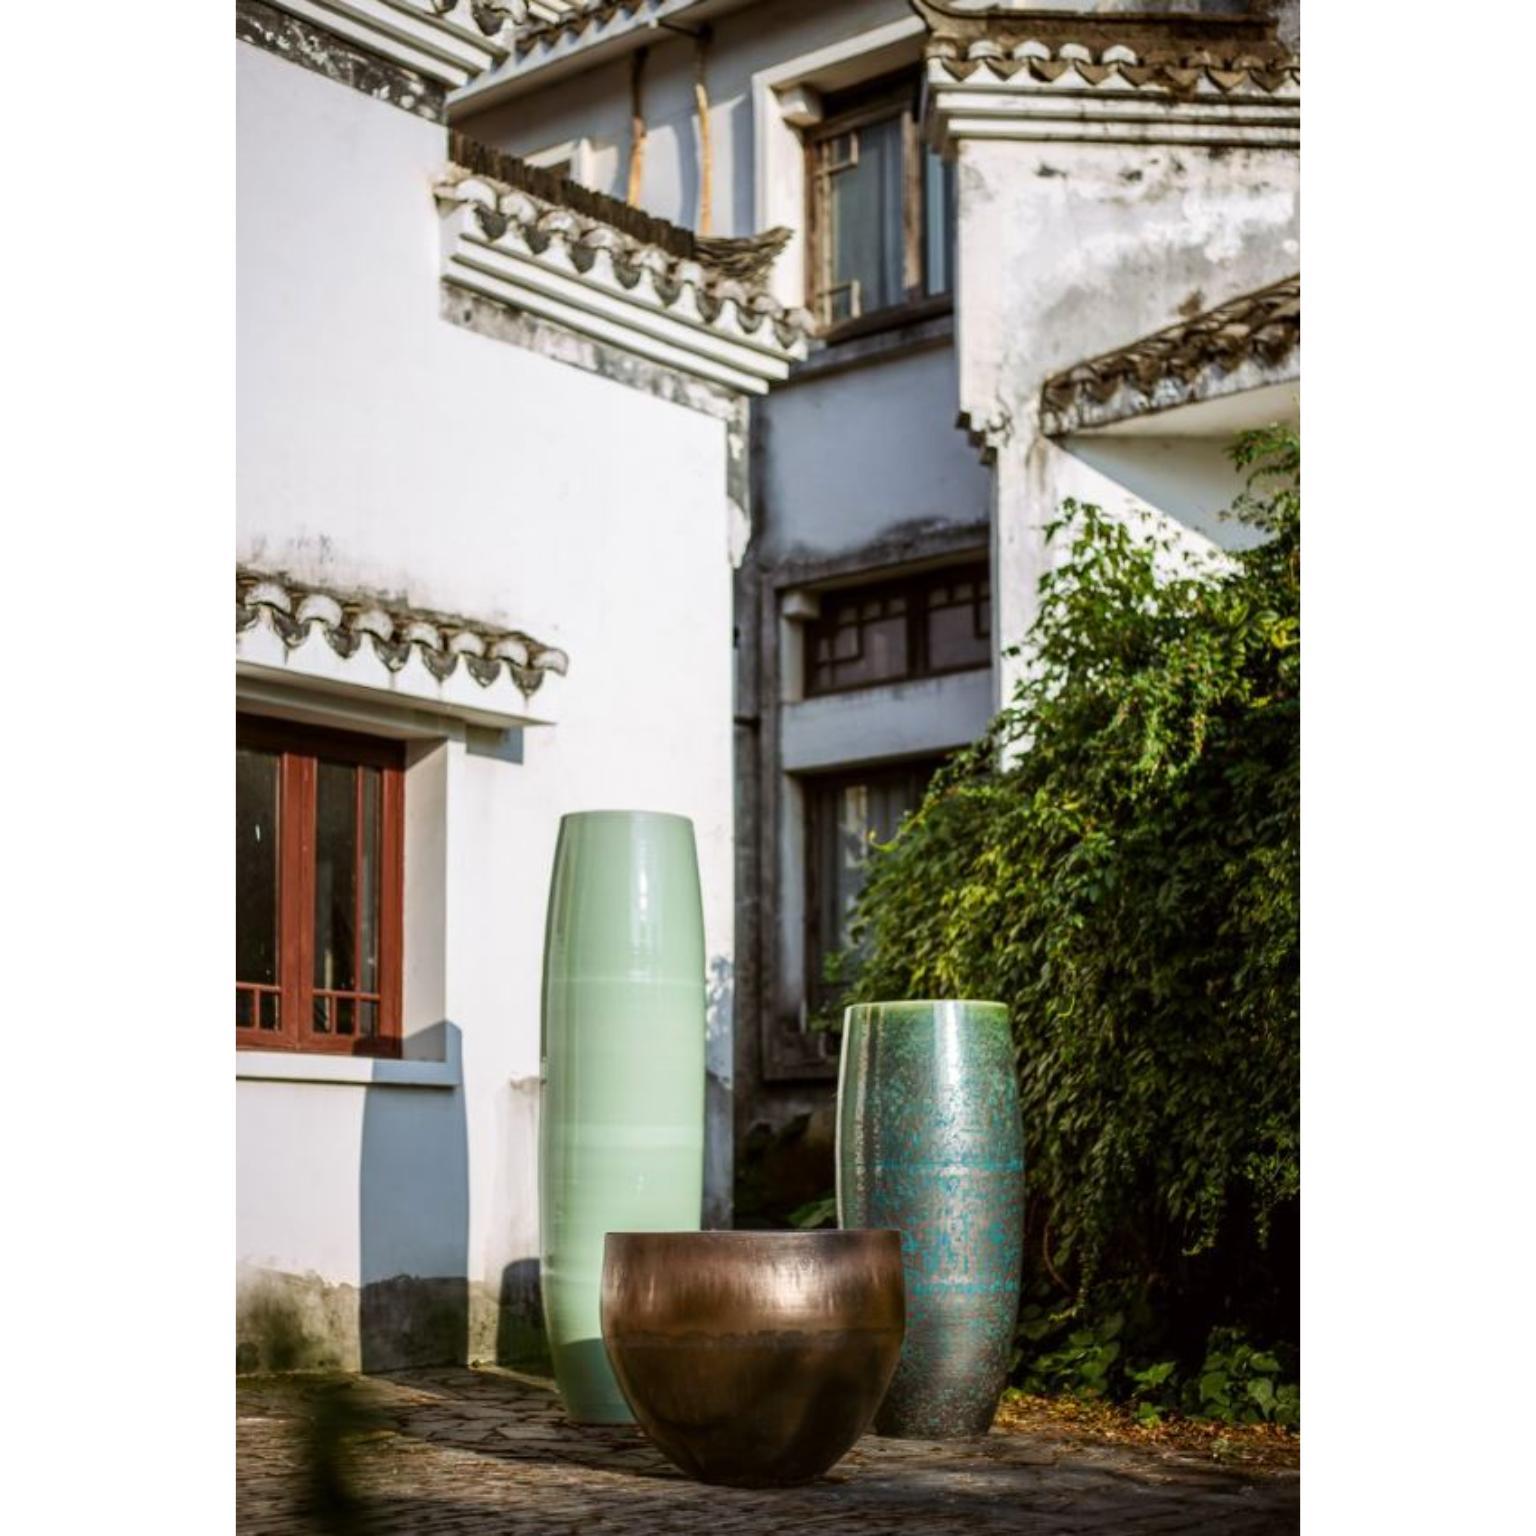 Elements Planters L by WL Ceramics
Designer: WL Ceramics
Materials: Porcelain
Dimensions: H180 x Ø50 cm

With their minimal yet elegant forms, the ELEMENTS PLANTERS are designed as a canvas for the many beautiful glazes that we have in our